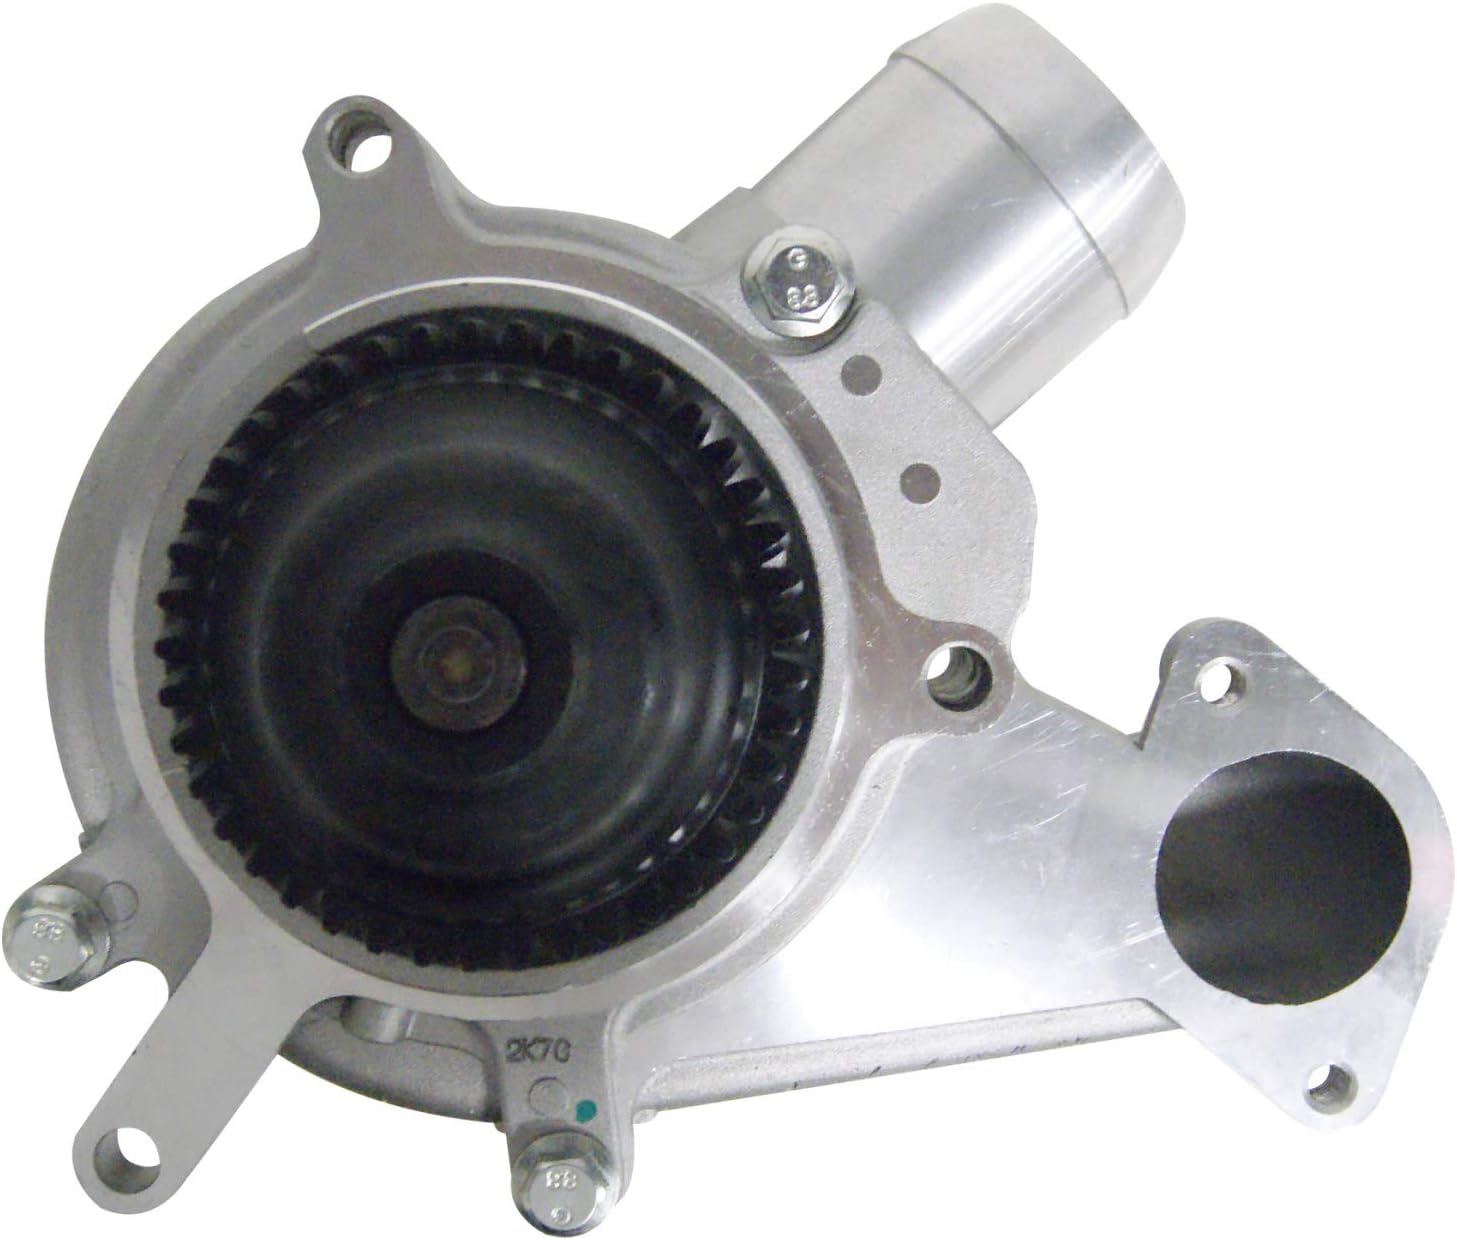 GMB 130-2030AH OE Replacement Water Pump with Bolt-On Housing and Gasket